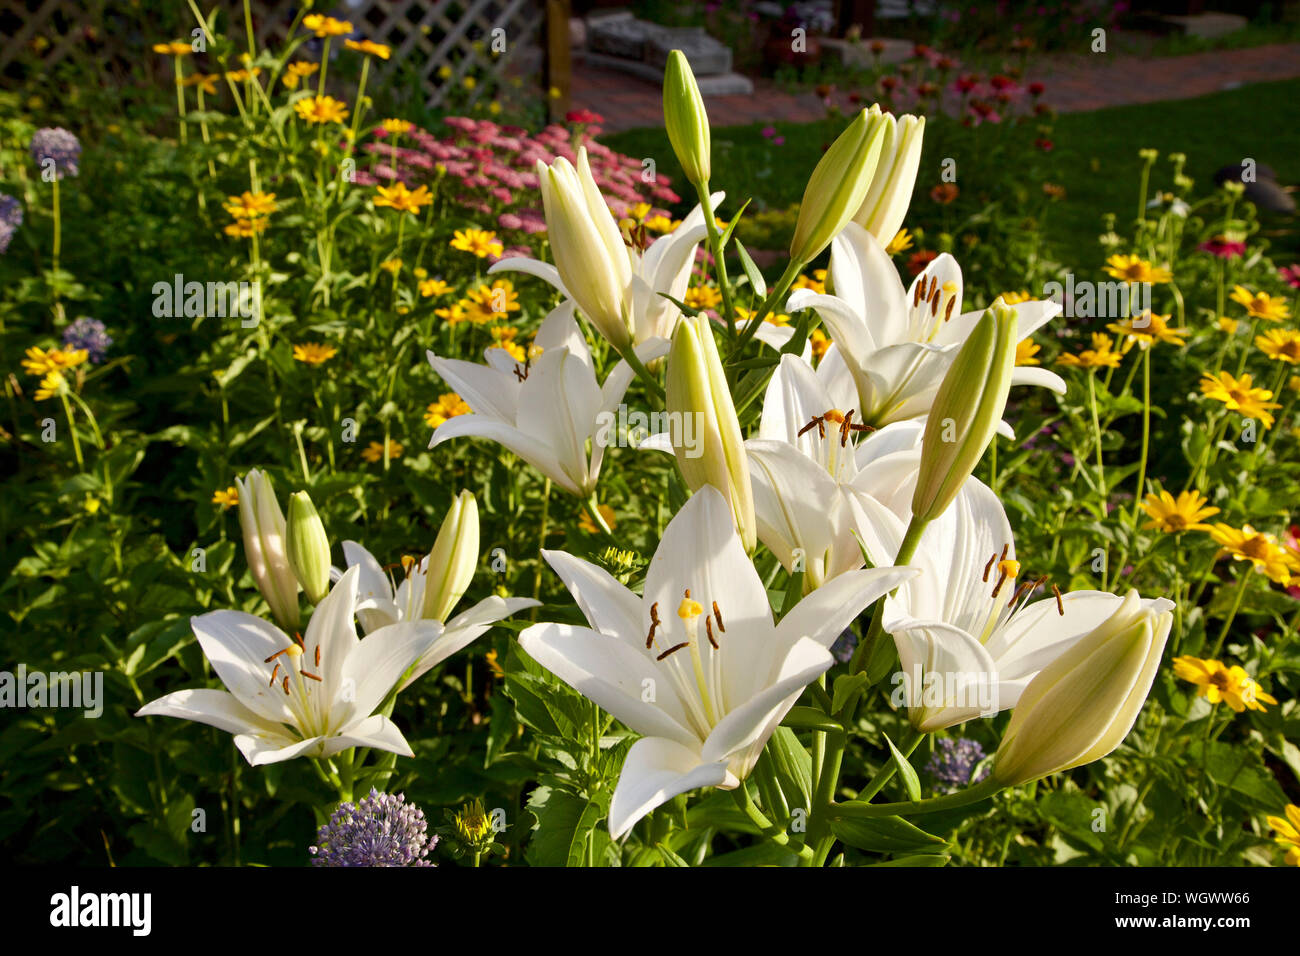 White Asiatic Lillies in full bloom in a garden setting. Stock Photo